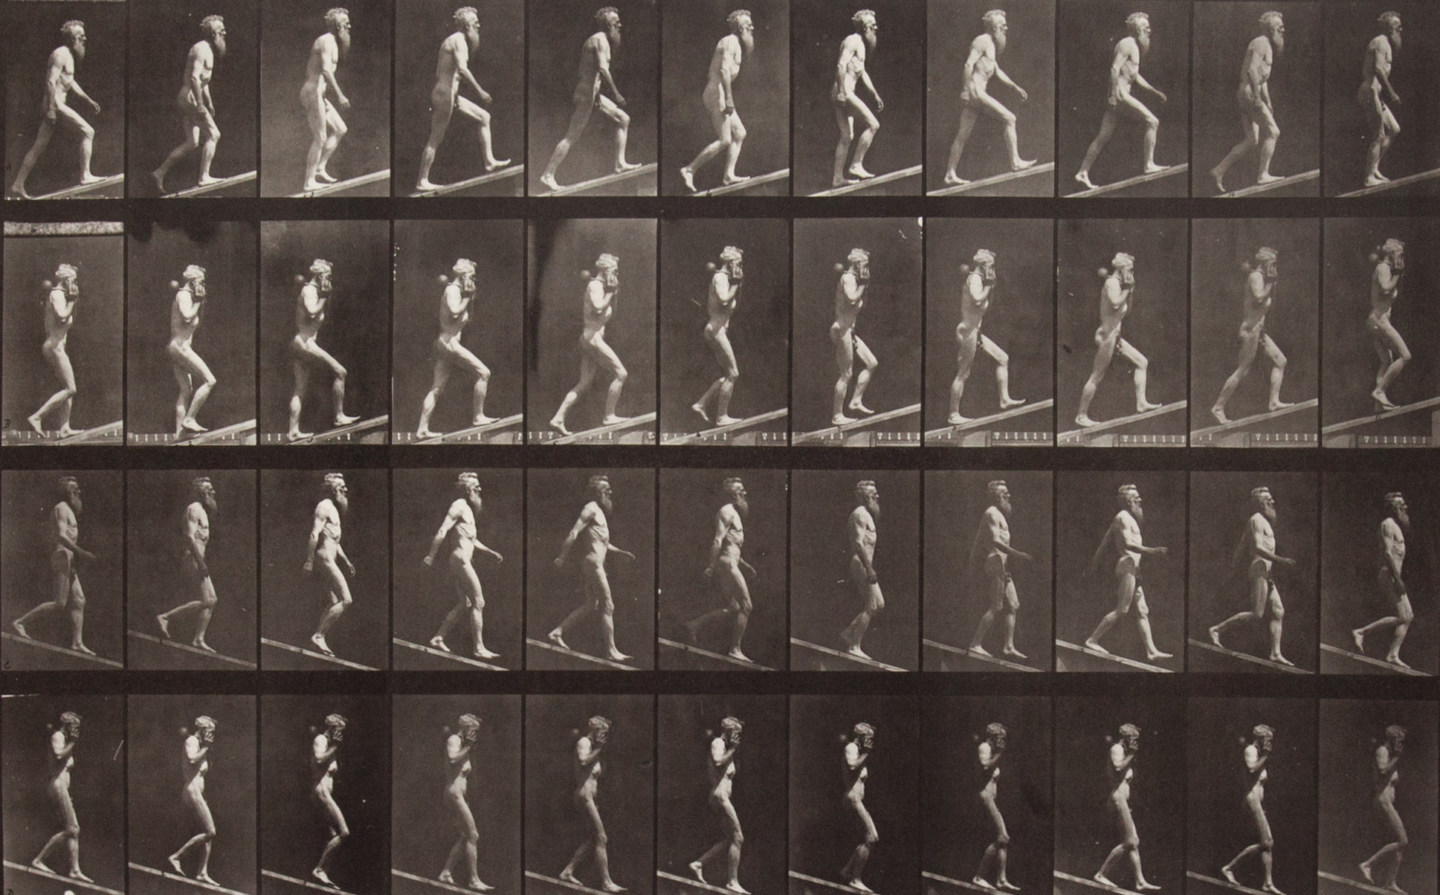 Sepia toned photograph with a grid of 44 panels showing a nude man walking on an incline. 12 panels show ascending motion; 12 show ascending motion carrying a dumbbell; 12 show descending motion; 12 show descending motion with a dumbbell.